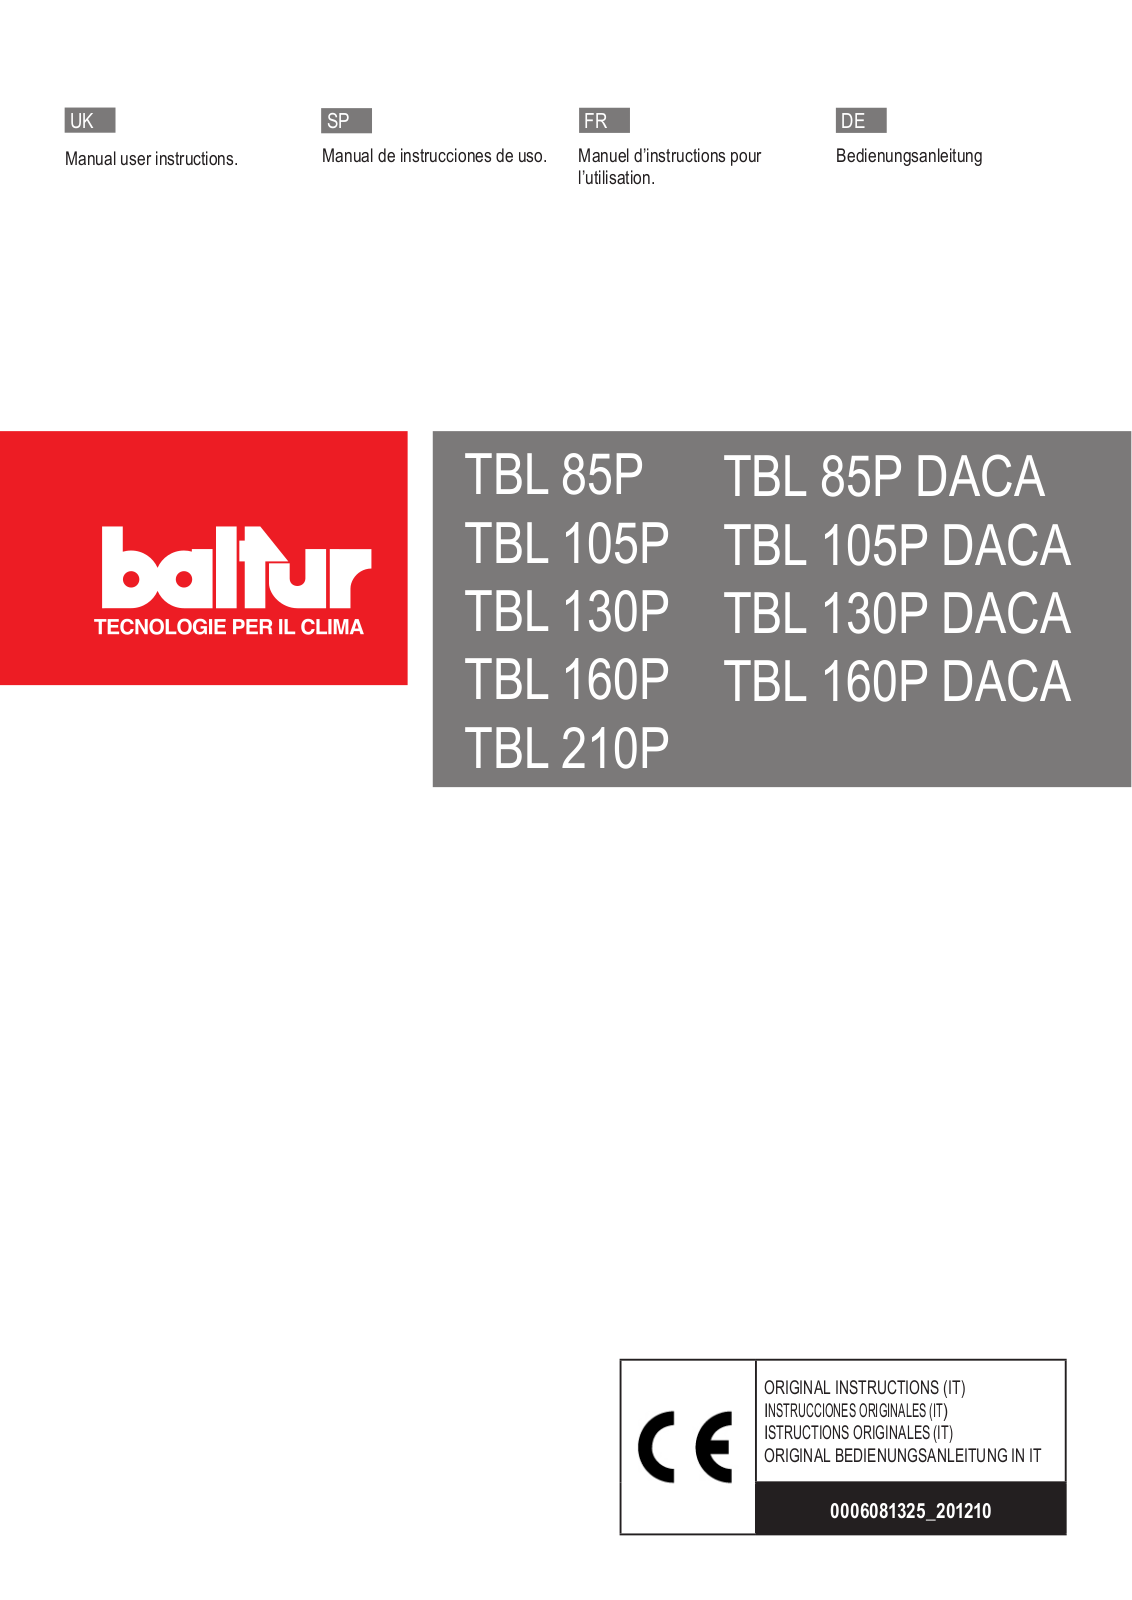 baltur TBL 85P, TBL 85P DACA, TBL 105P DACA, TBL 105P, TBL 130P Manual User Instructions